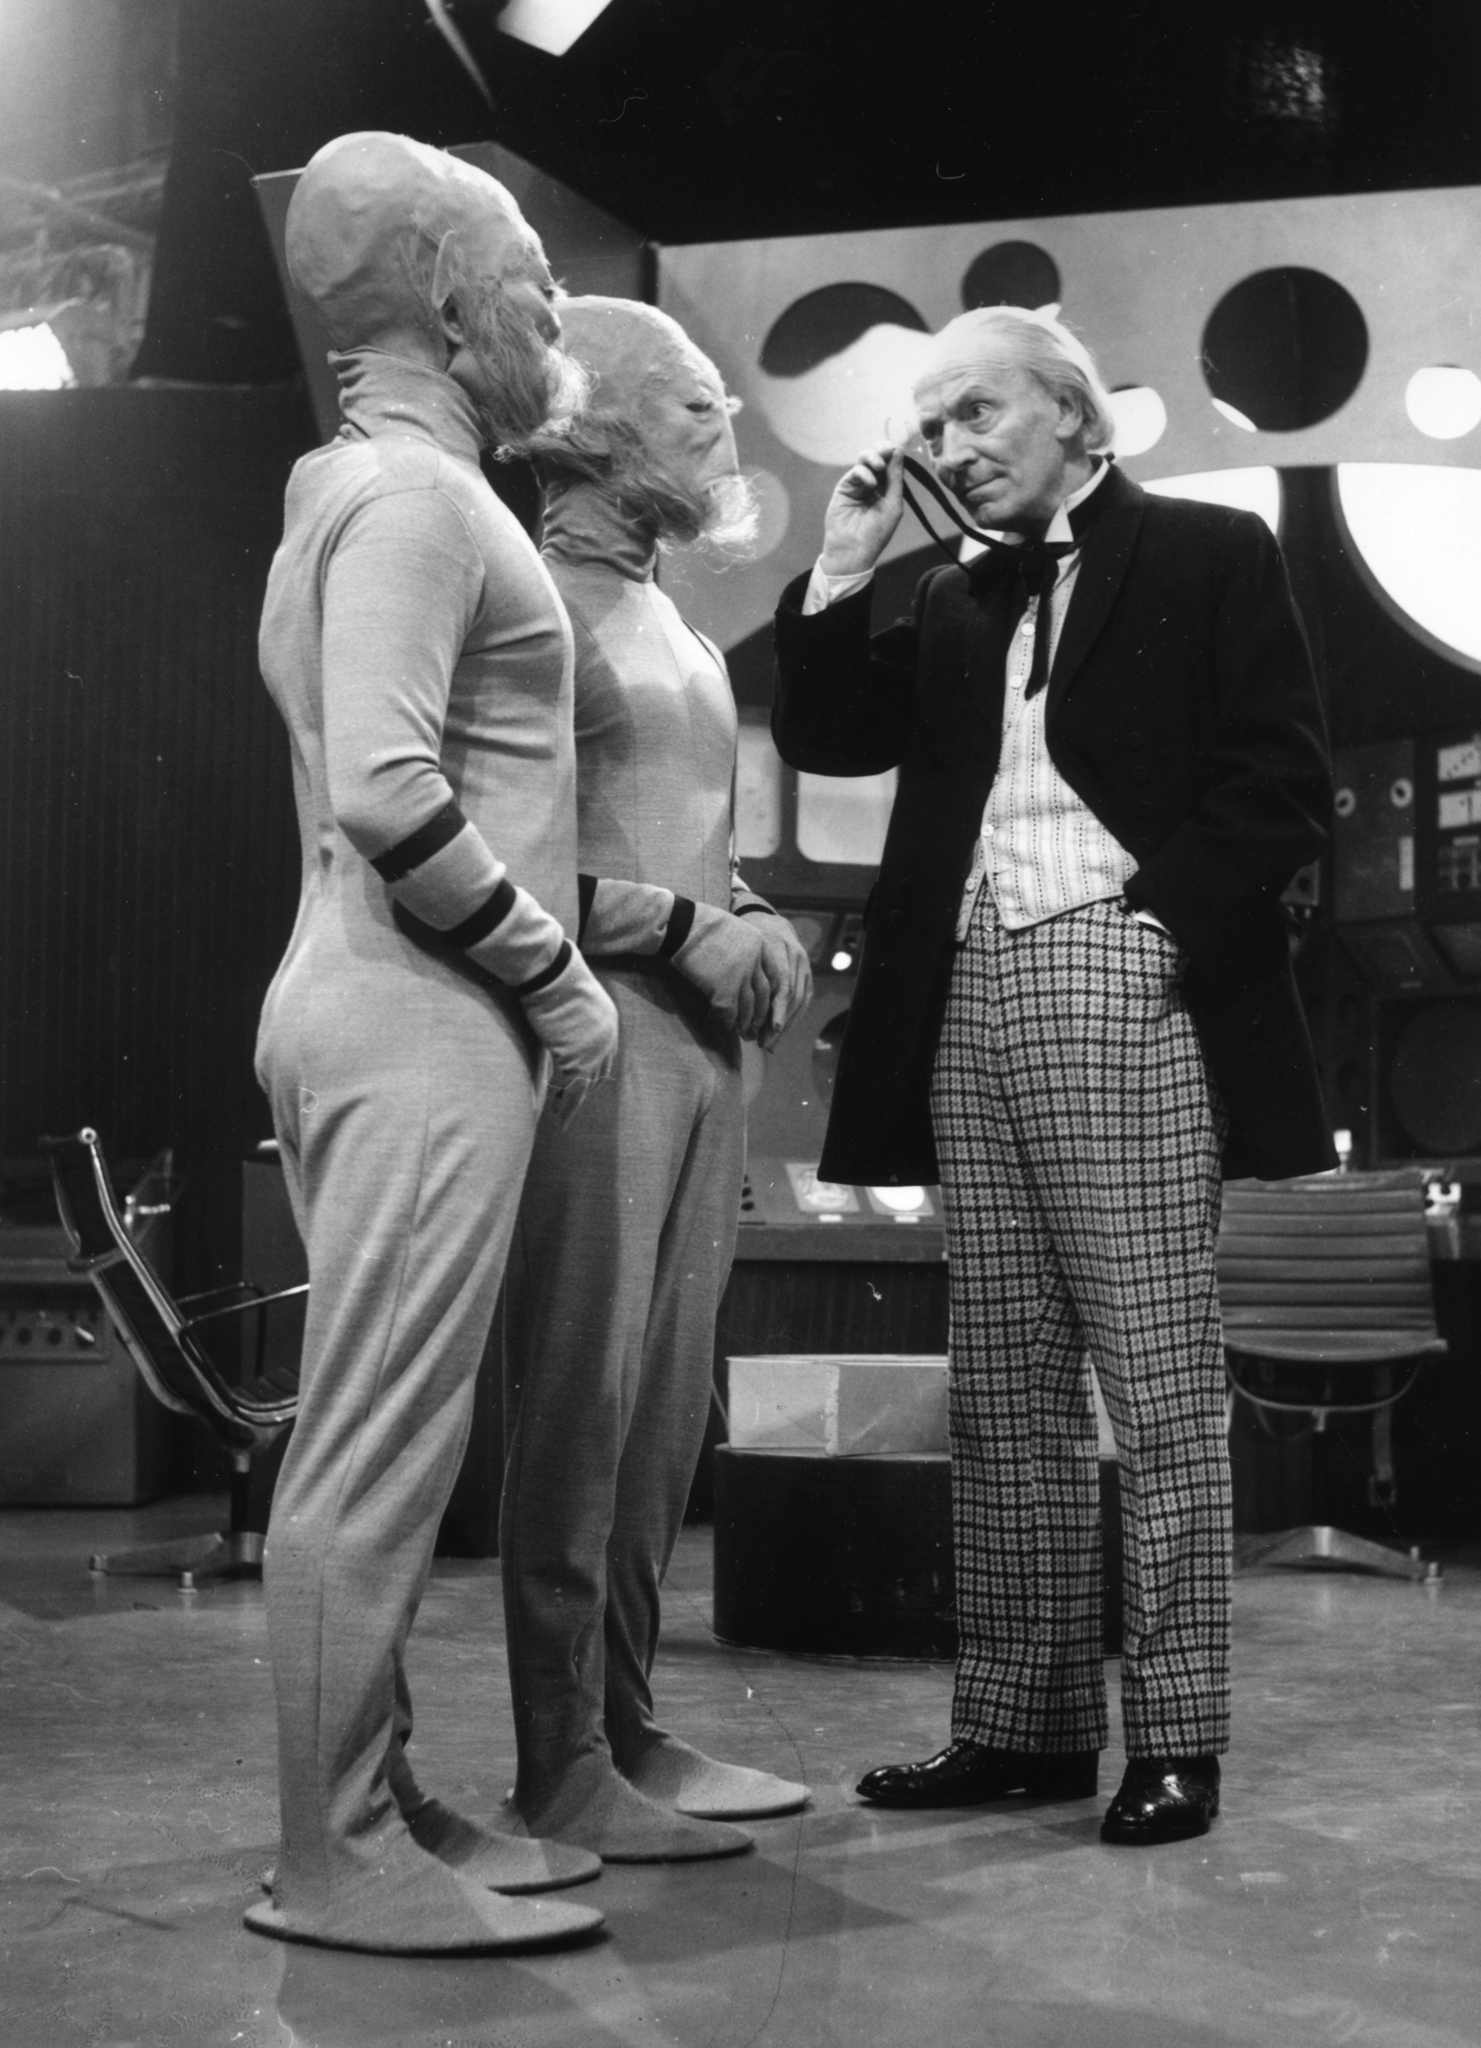 William Hartnell as Dr Who, peers through his monocle at two extra-terrestrials during filming of the popular science fiction series, 'Dr Who' at the BBC's Shepherds Bush Studios in London.